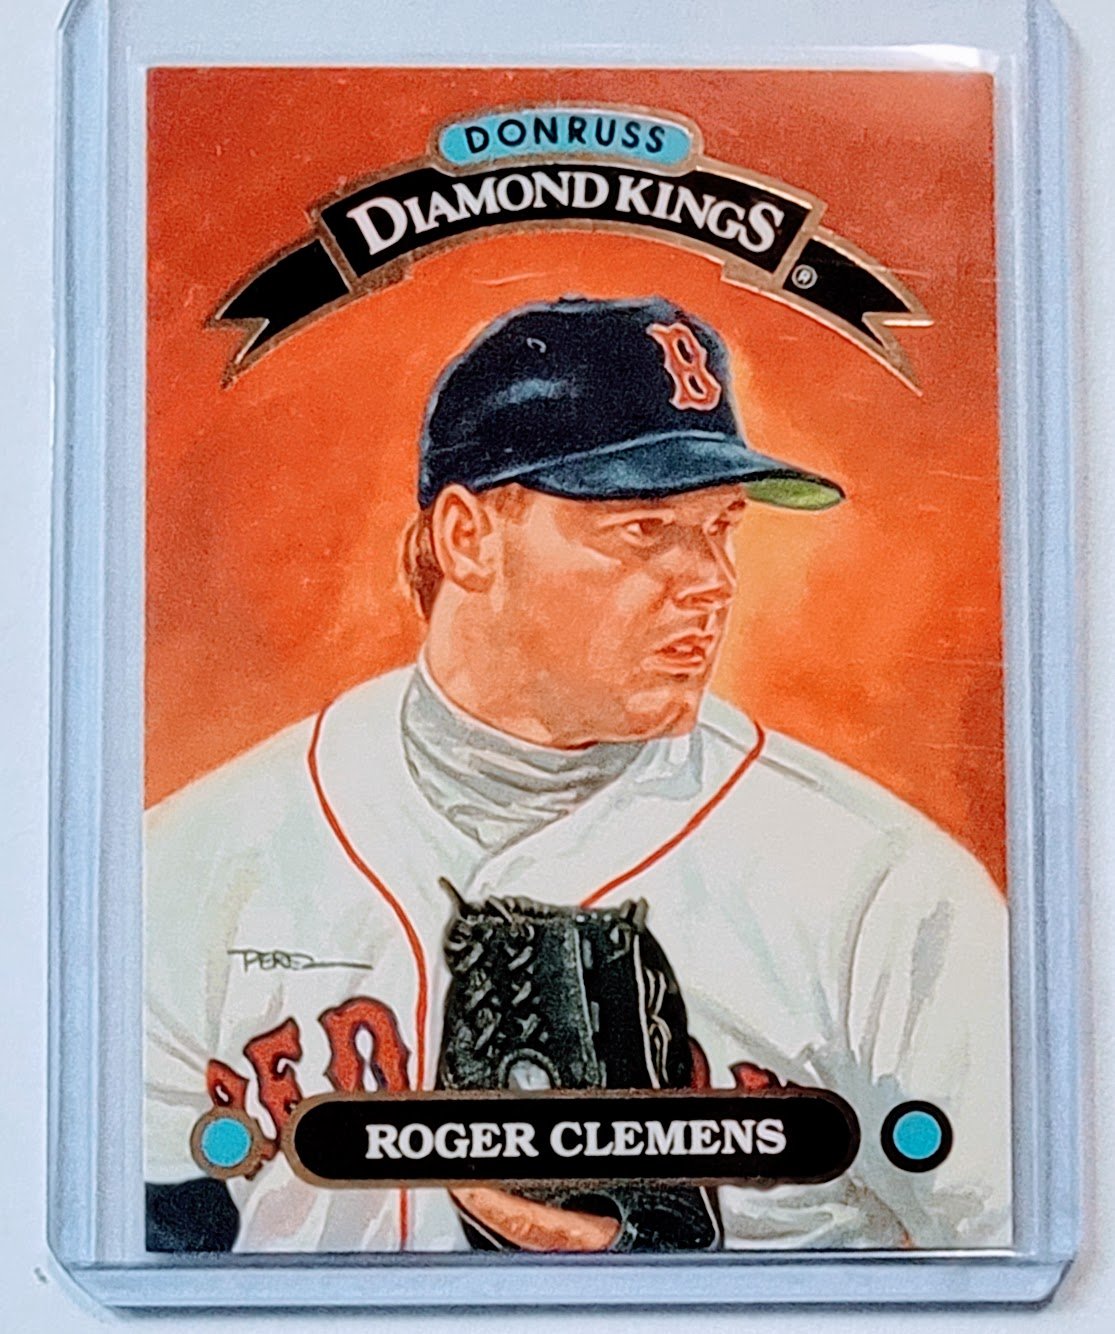 1993 Donruss Diamond Kings Roger Clemens Baseball Trading Card TPTV simple Xclusive Collectibles   